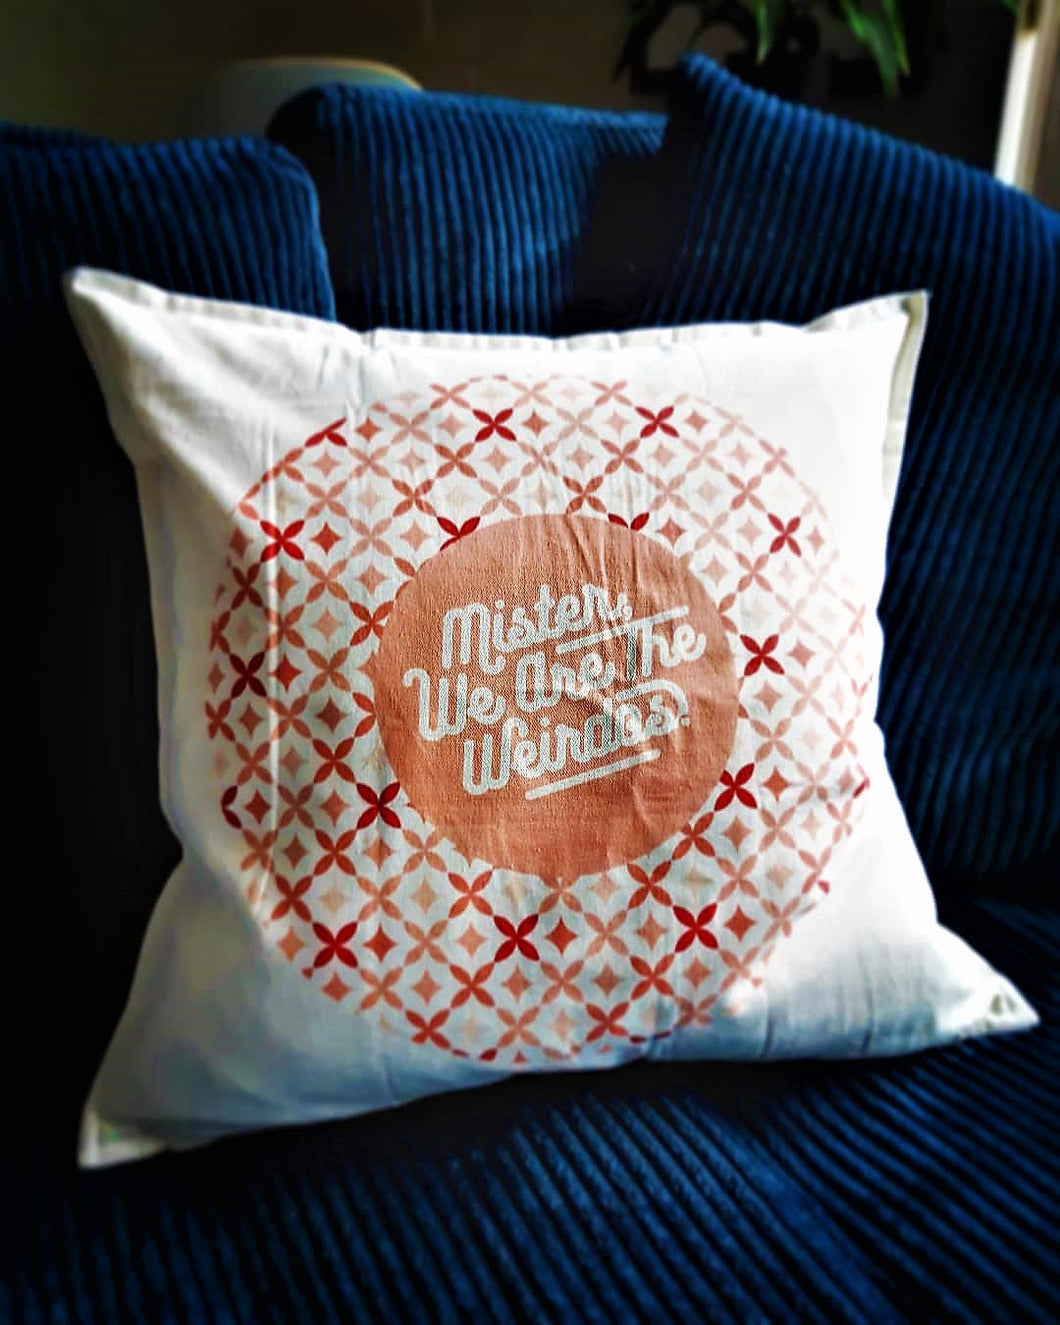 Mister, We Are the Weirdos Pretty Patterned Pillowcase